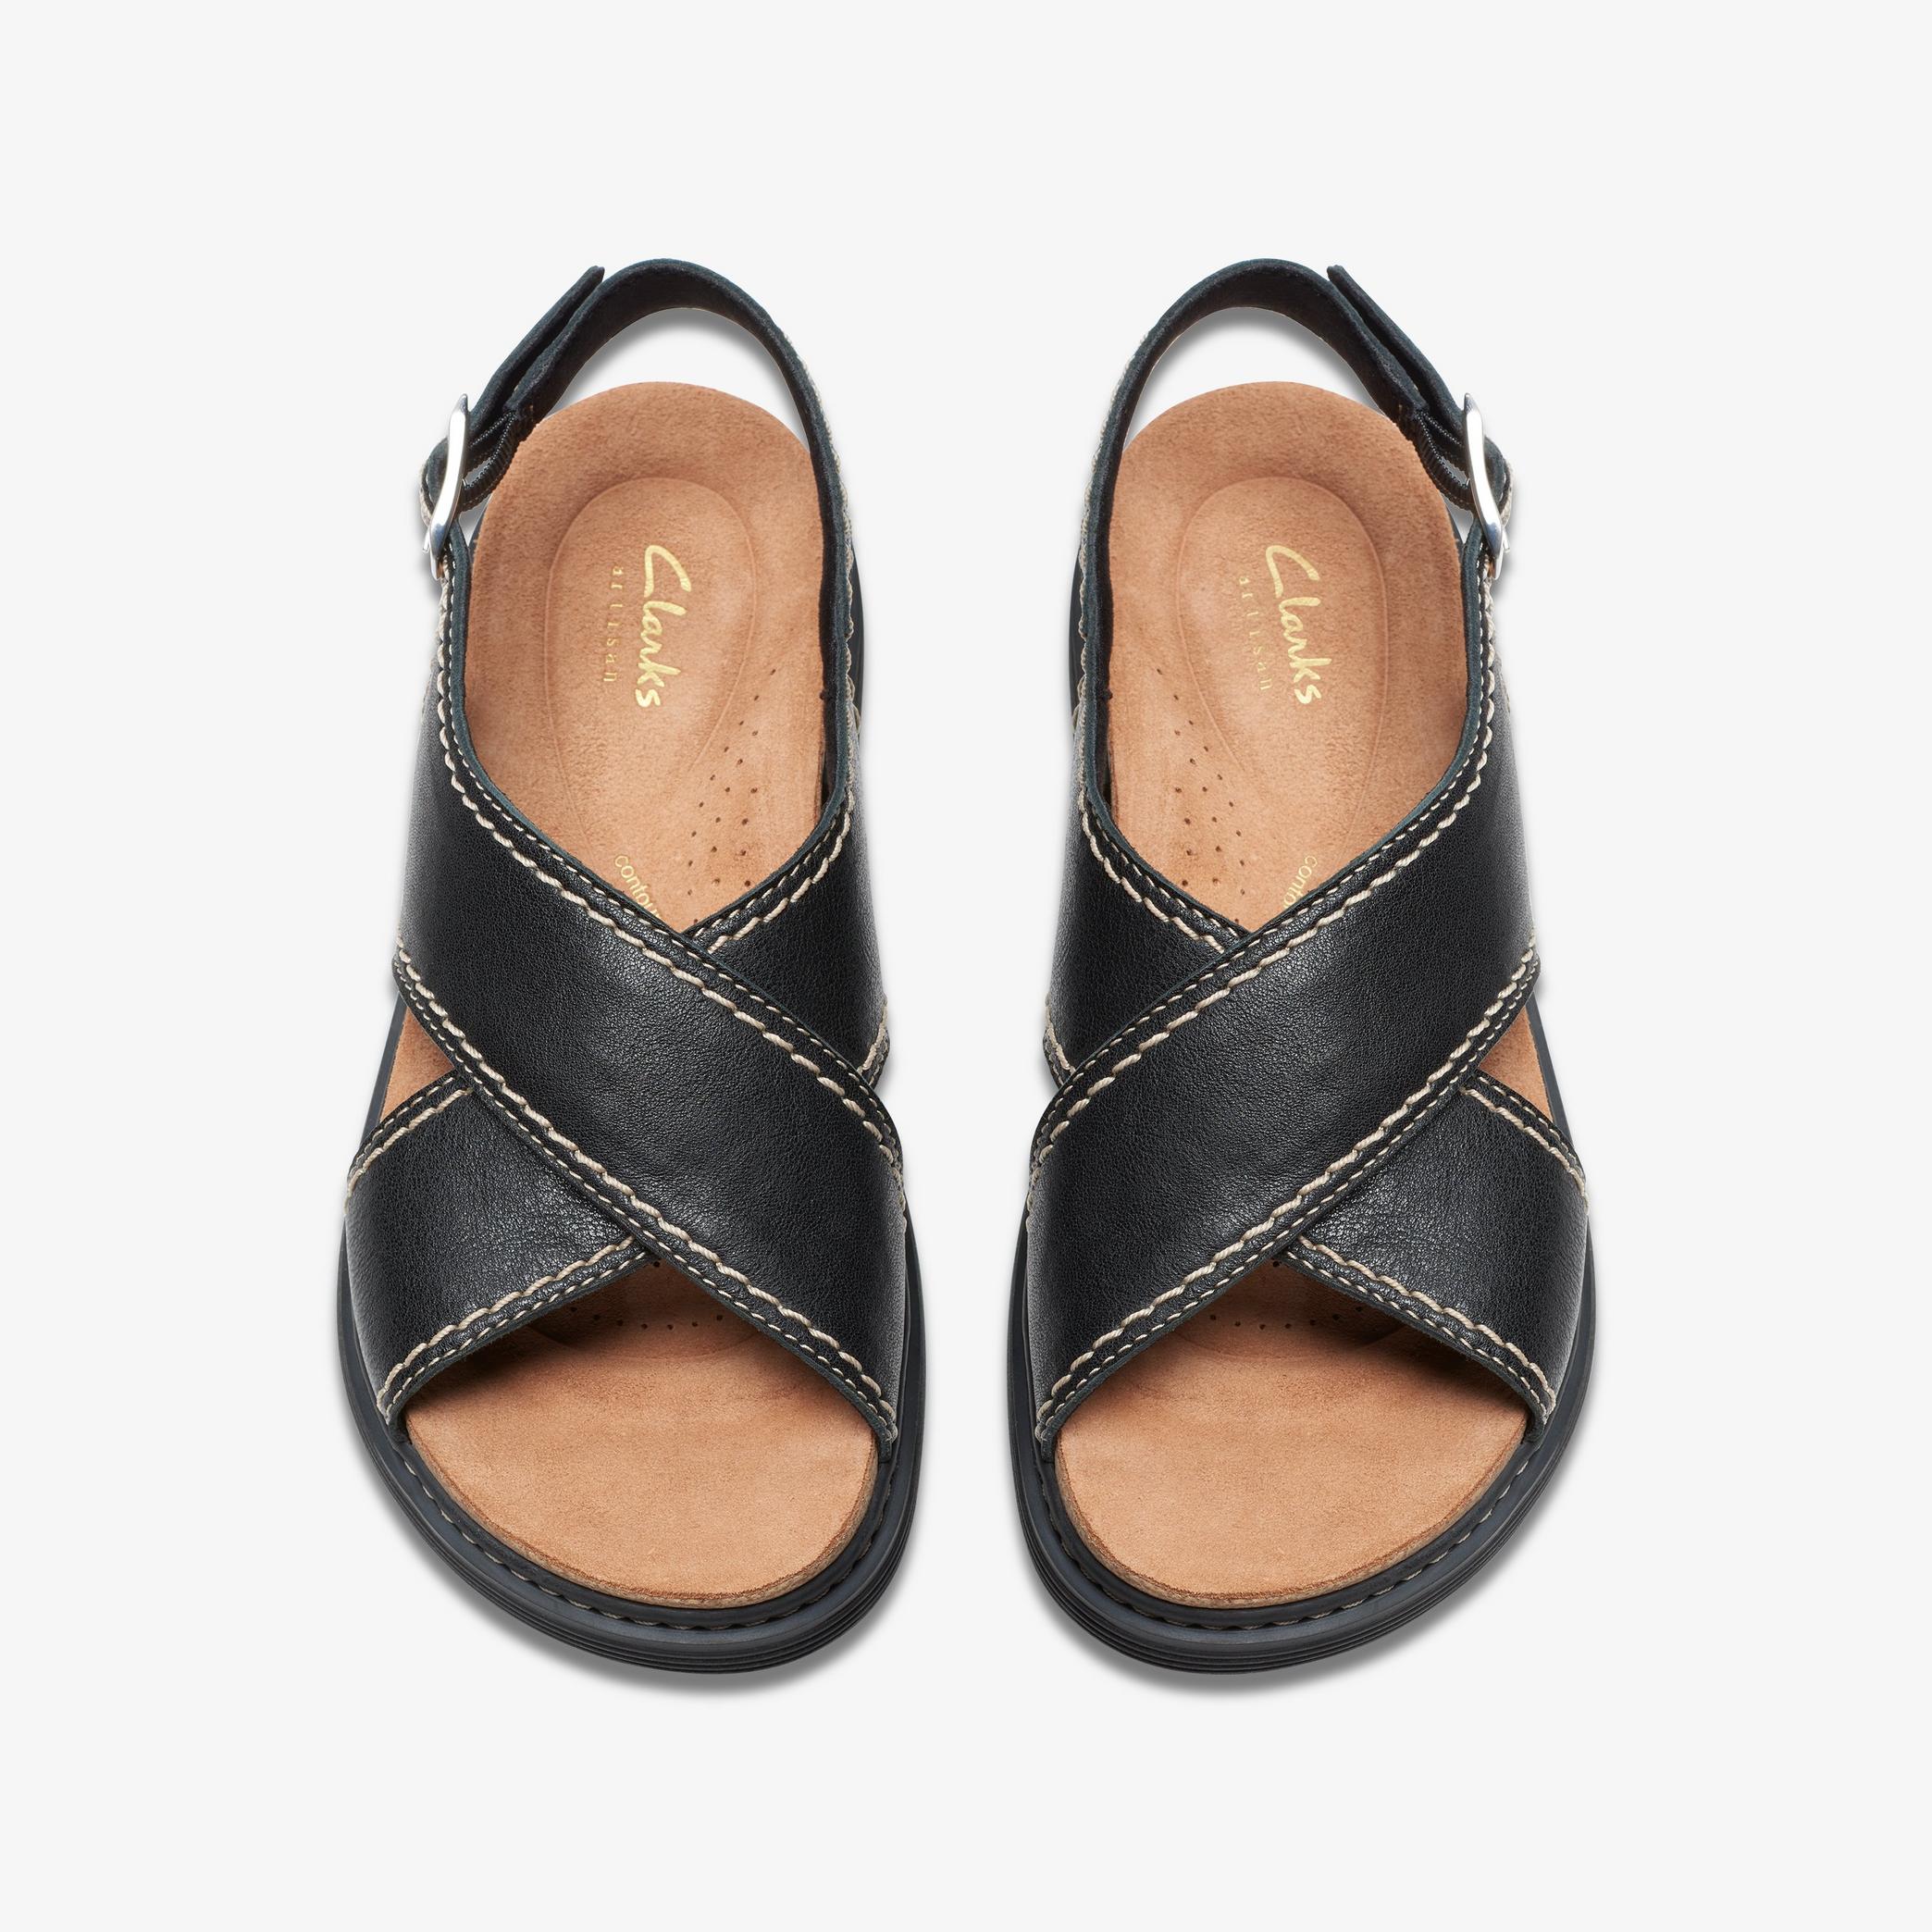 Arwell Sling Black Leather Flat Sandals, view 6 of 6